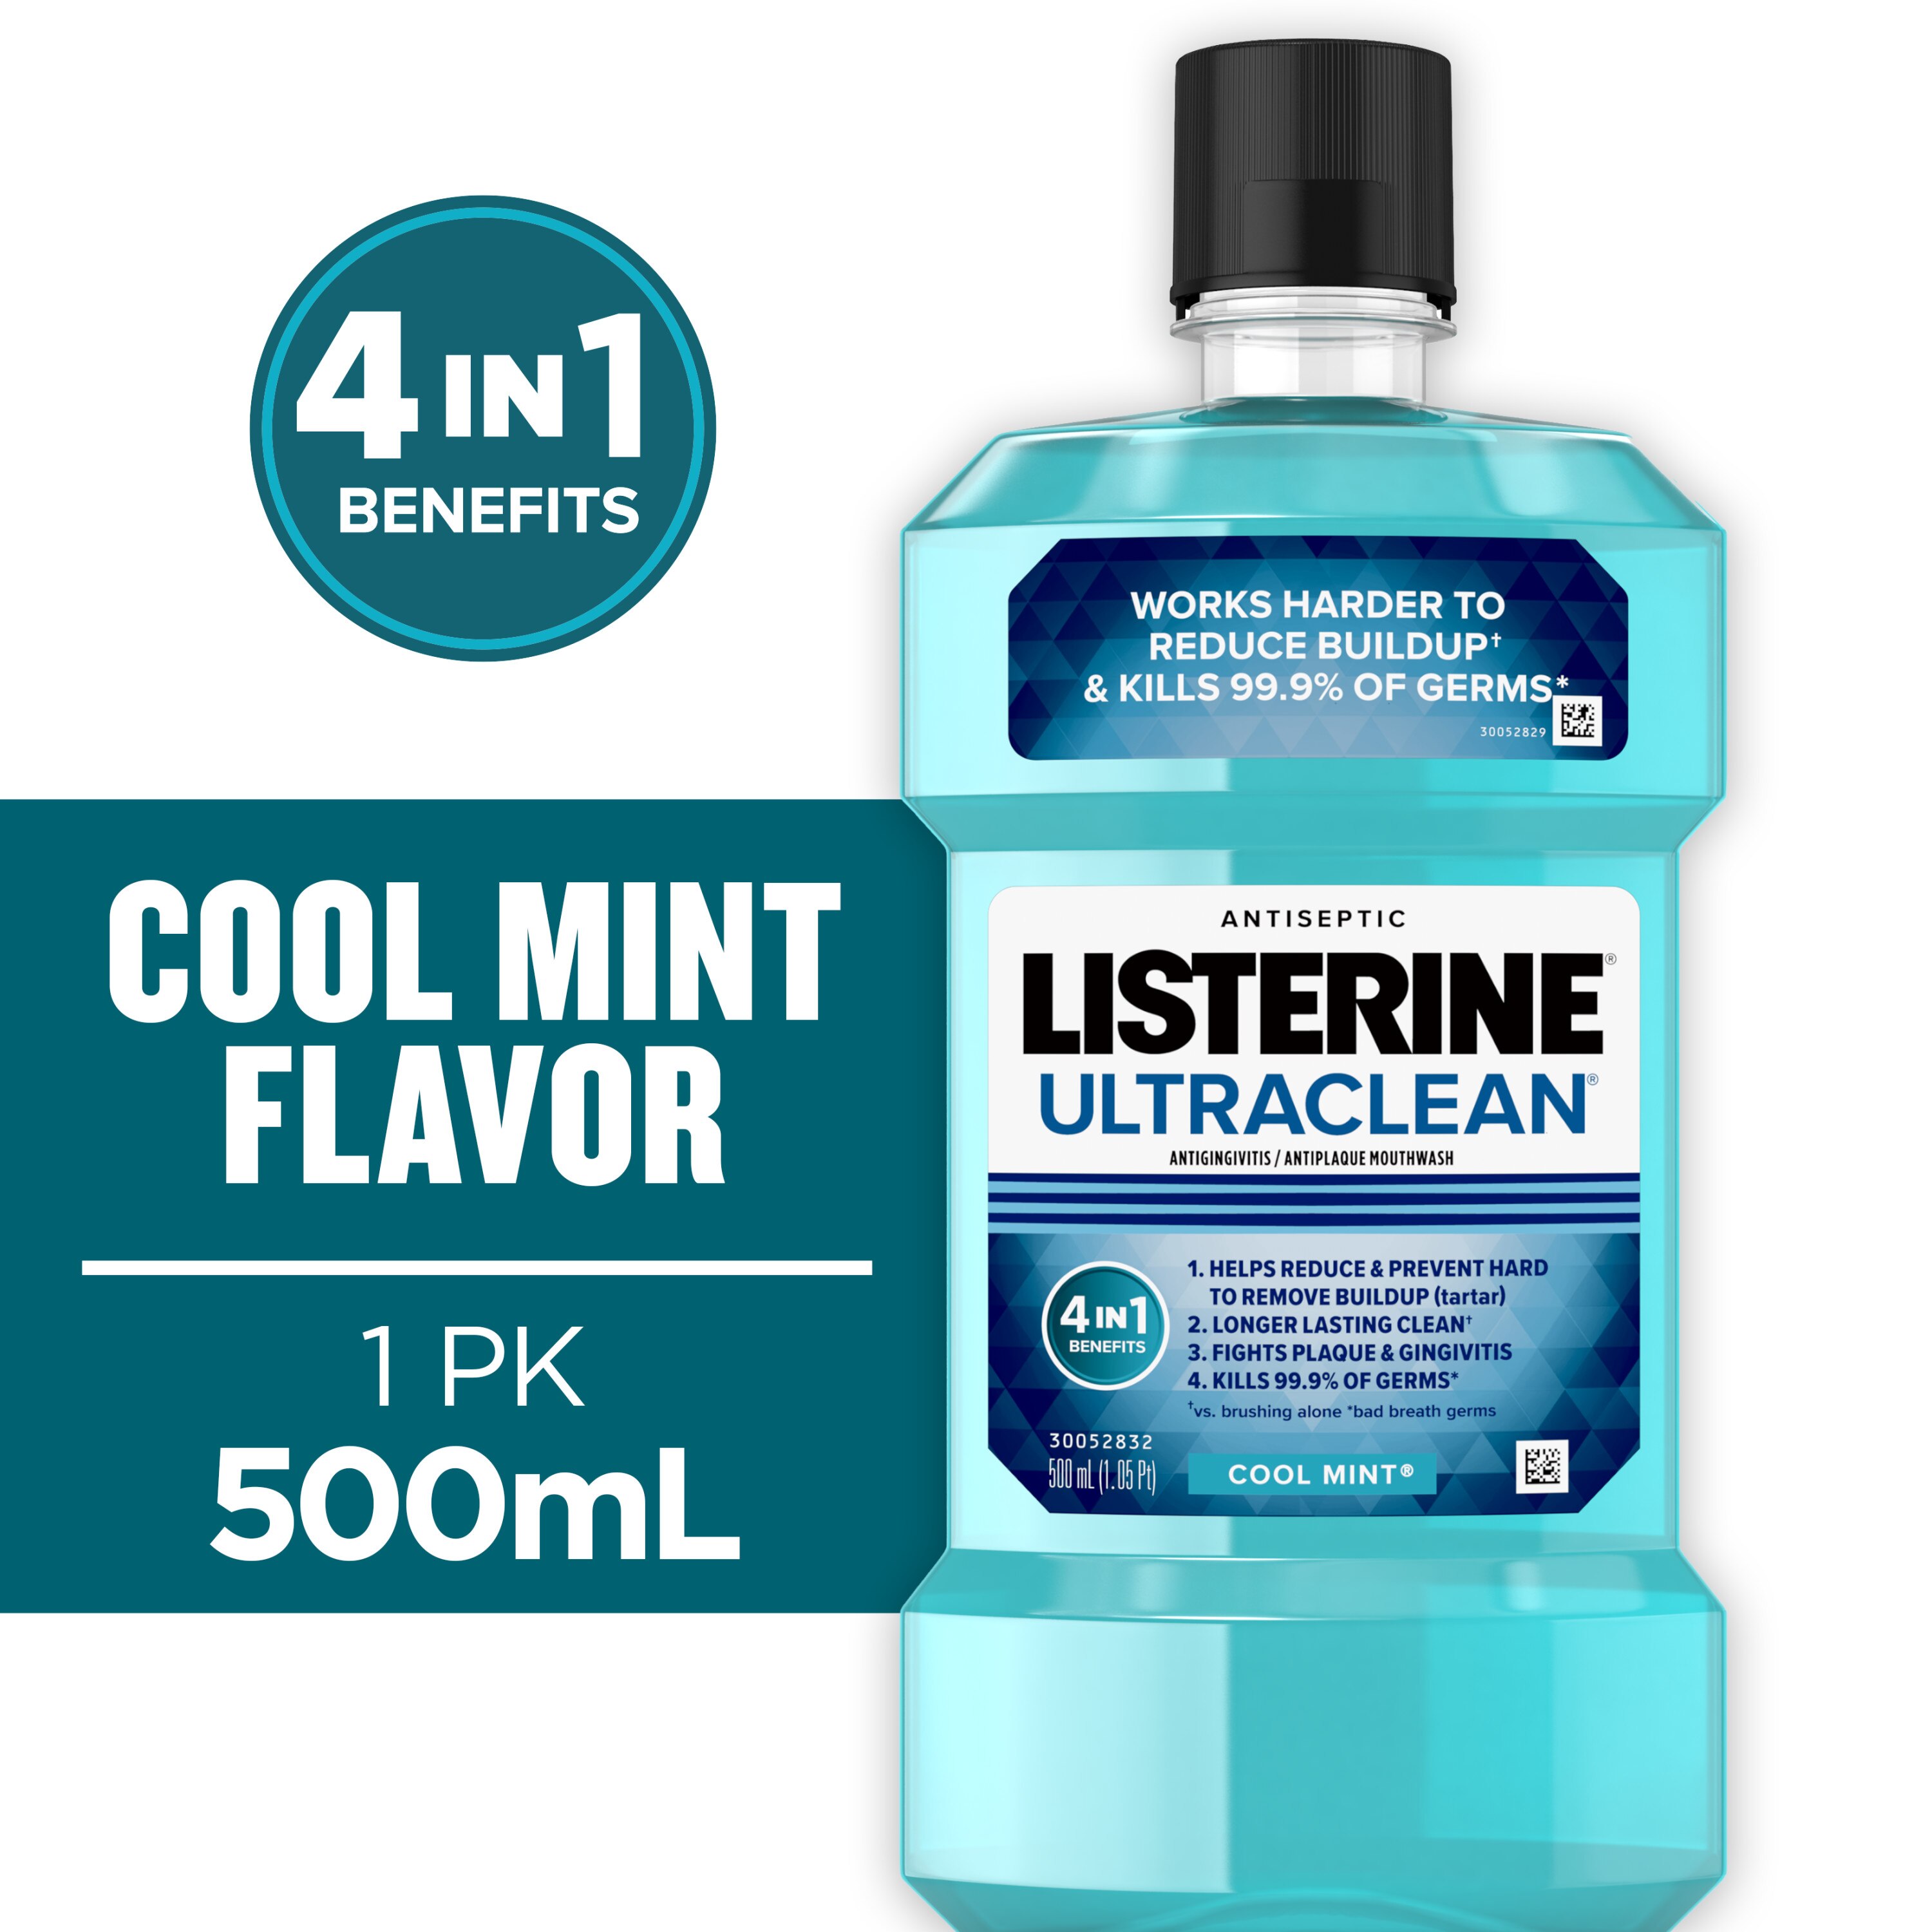 Listerine Ultraclean Antiseptic Antigingivitis Mouthwash for Tartar and Plaque, Cool Mint